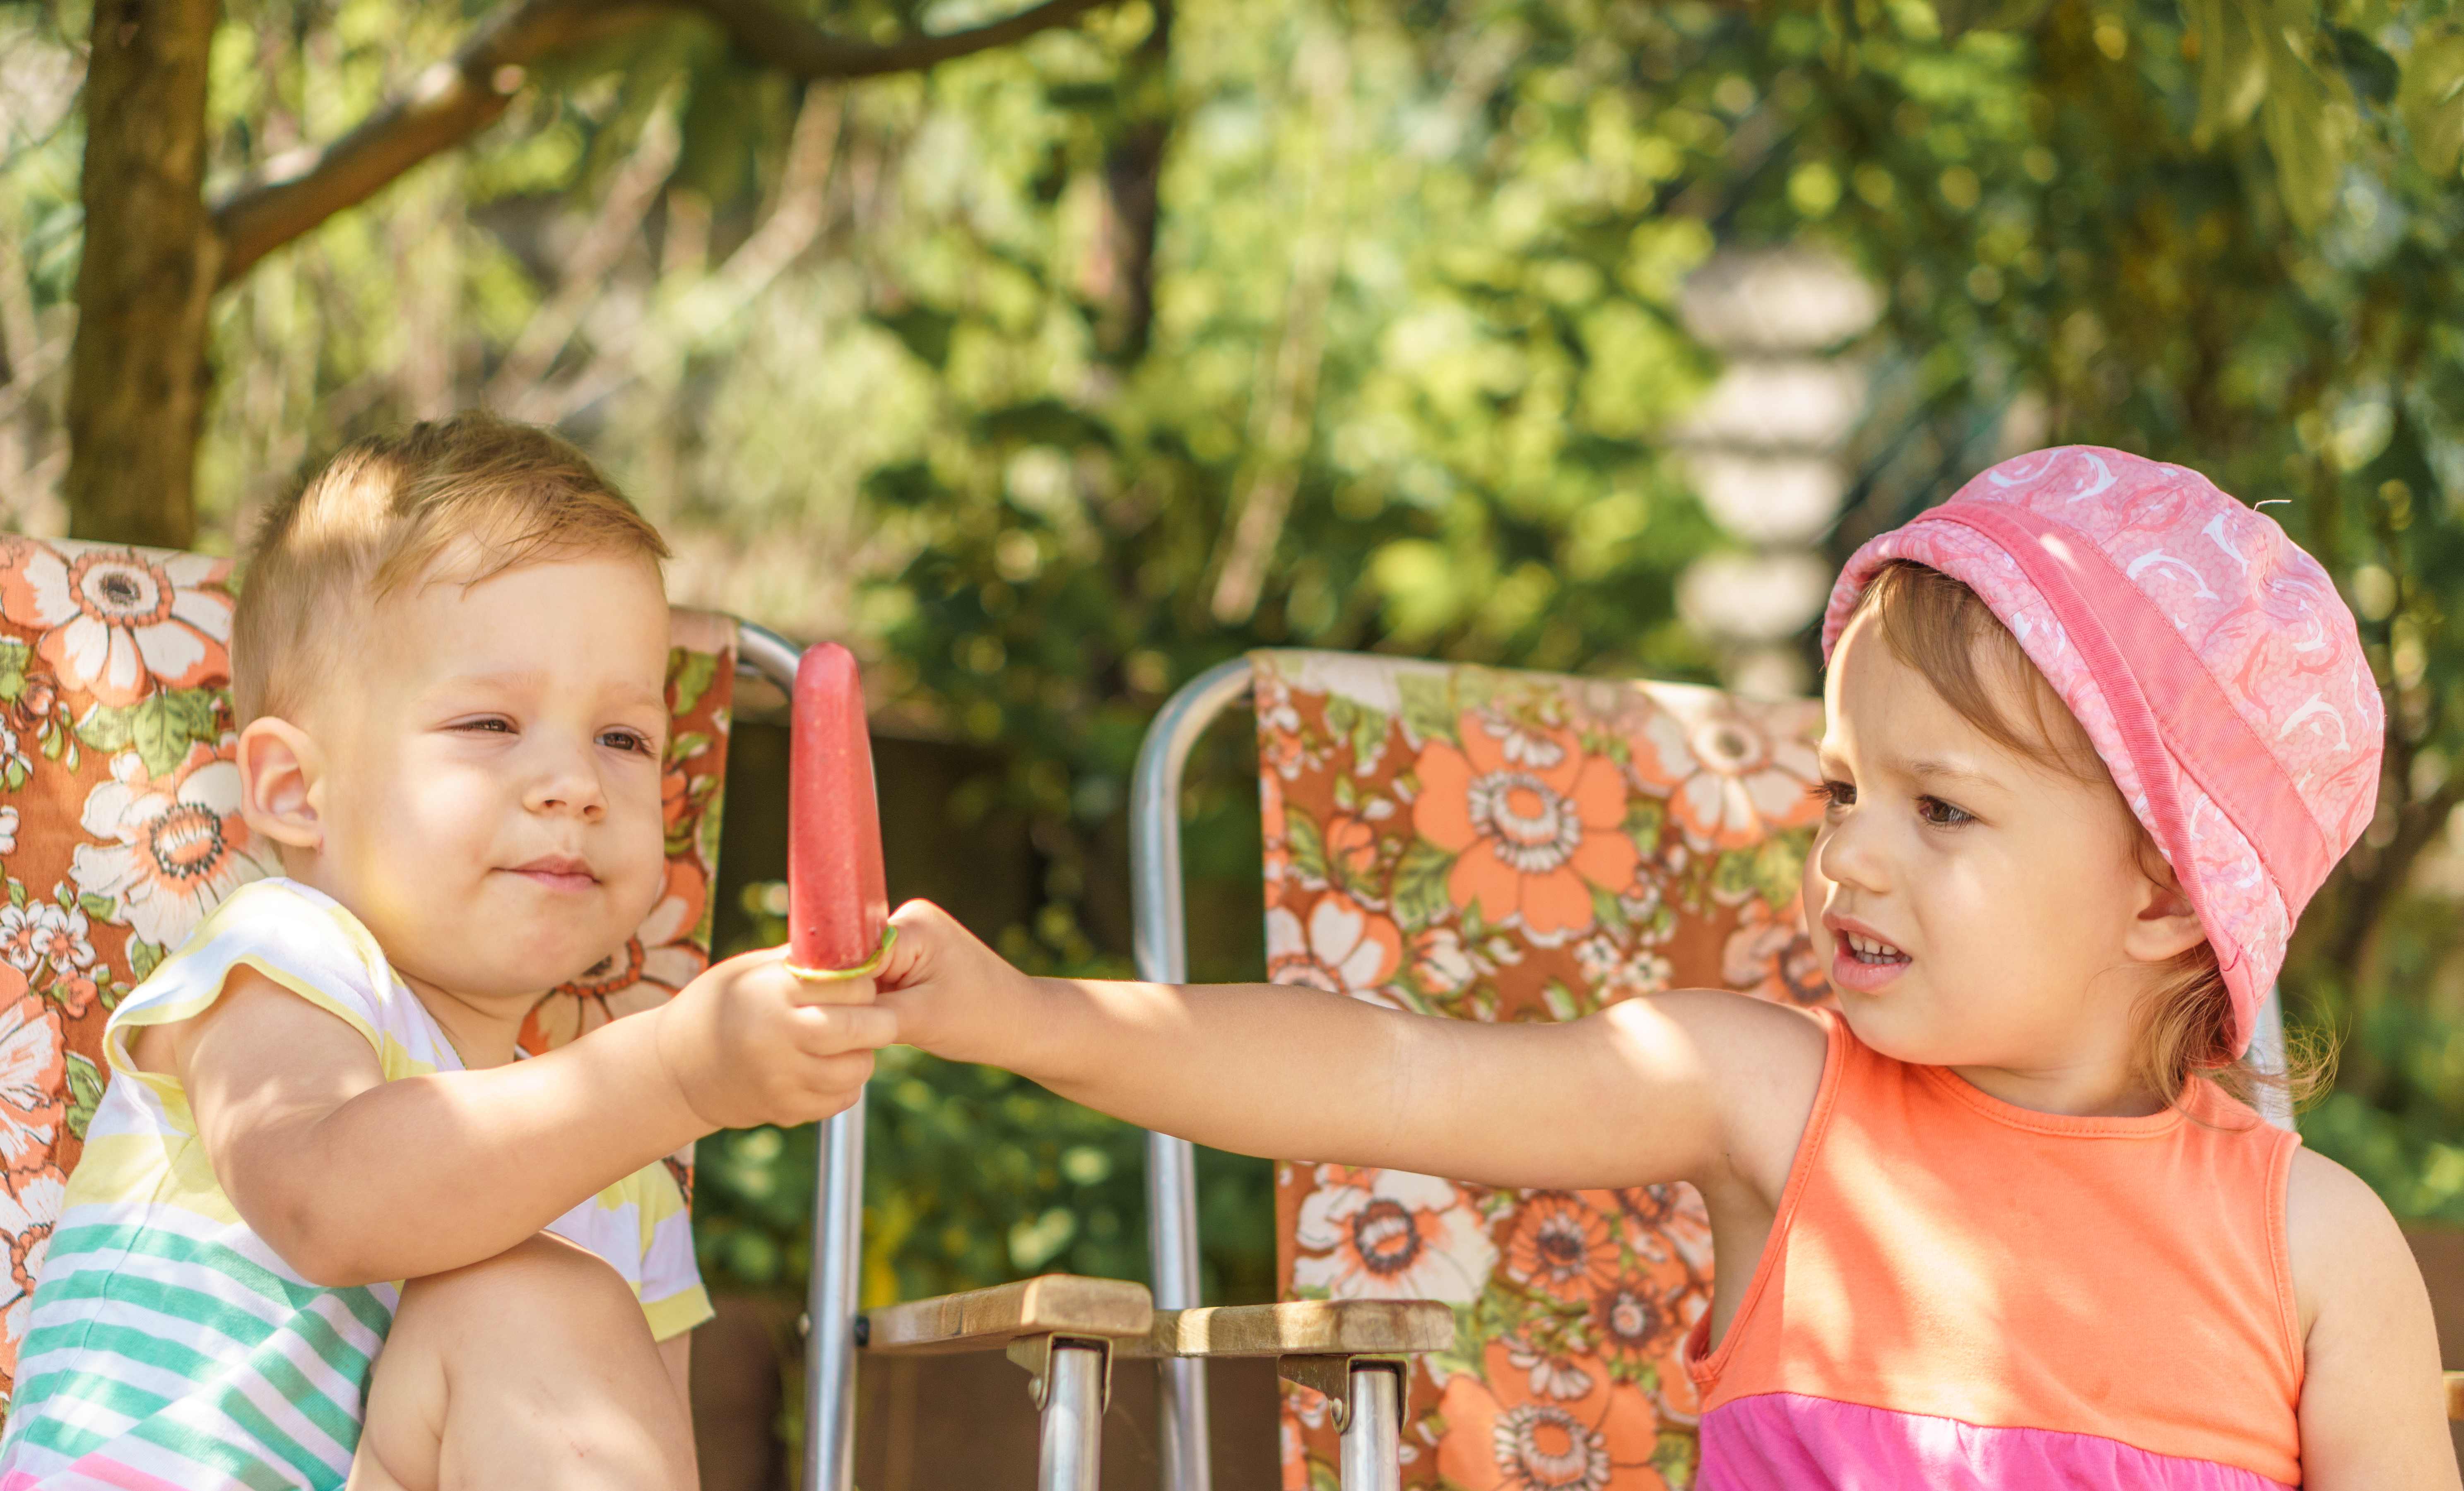 Two toddlers share a homemade popsicle before the end of summer